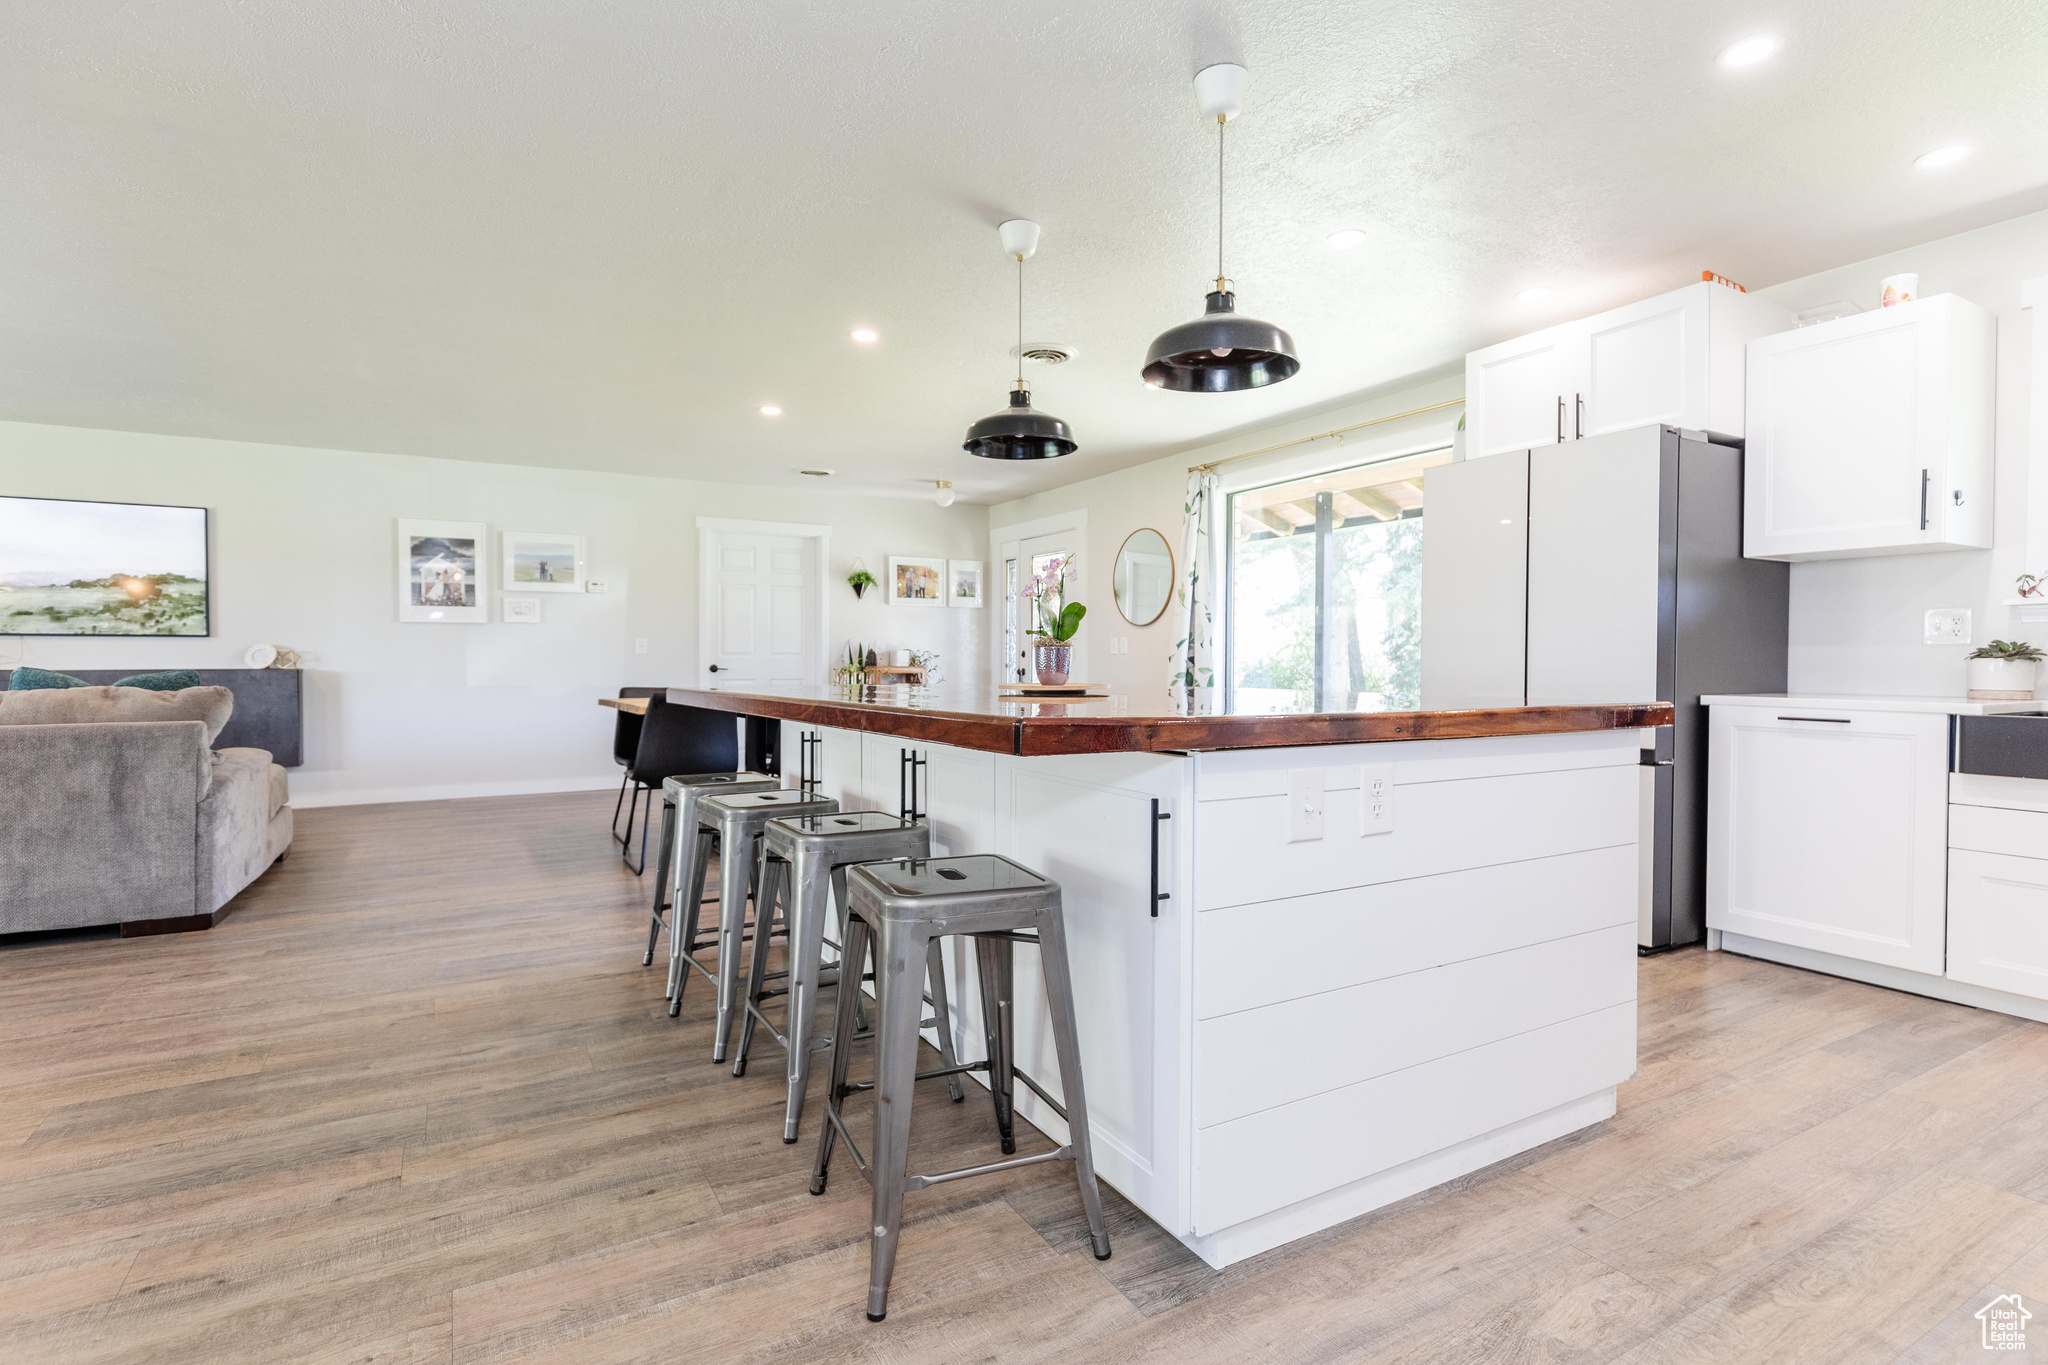 Kitchen featuring wooden counters, pendant lighting, light hardwood / wood-style floors, and white cabinetry